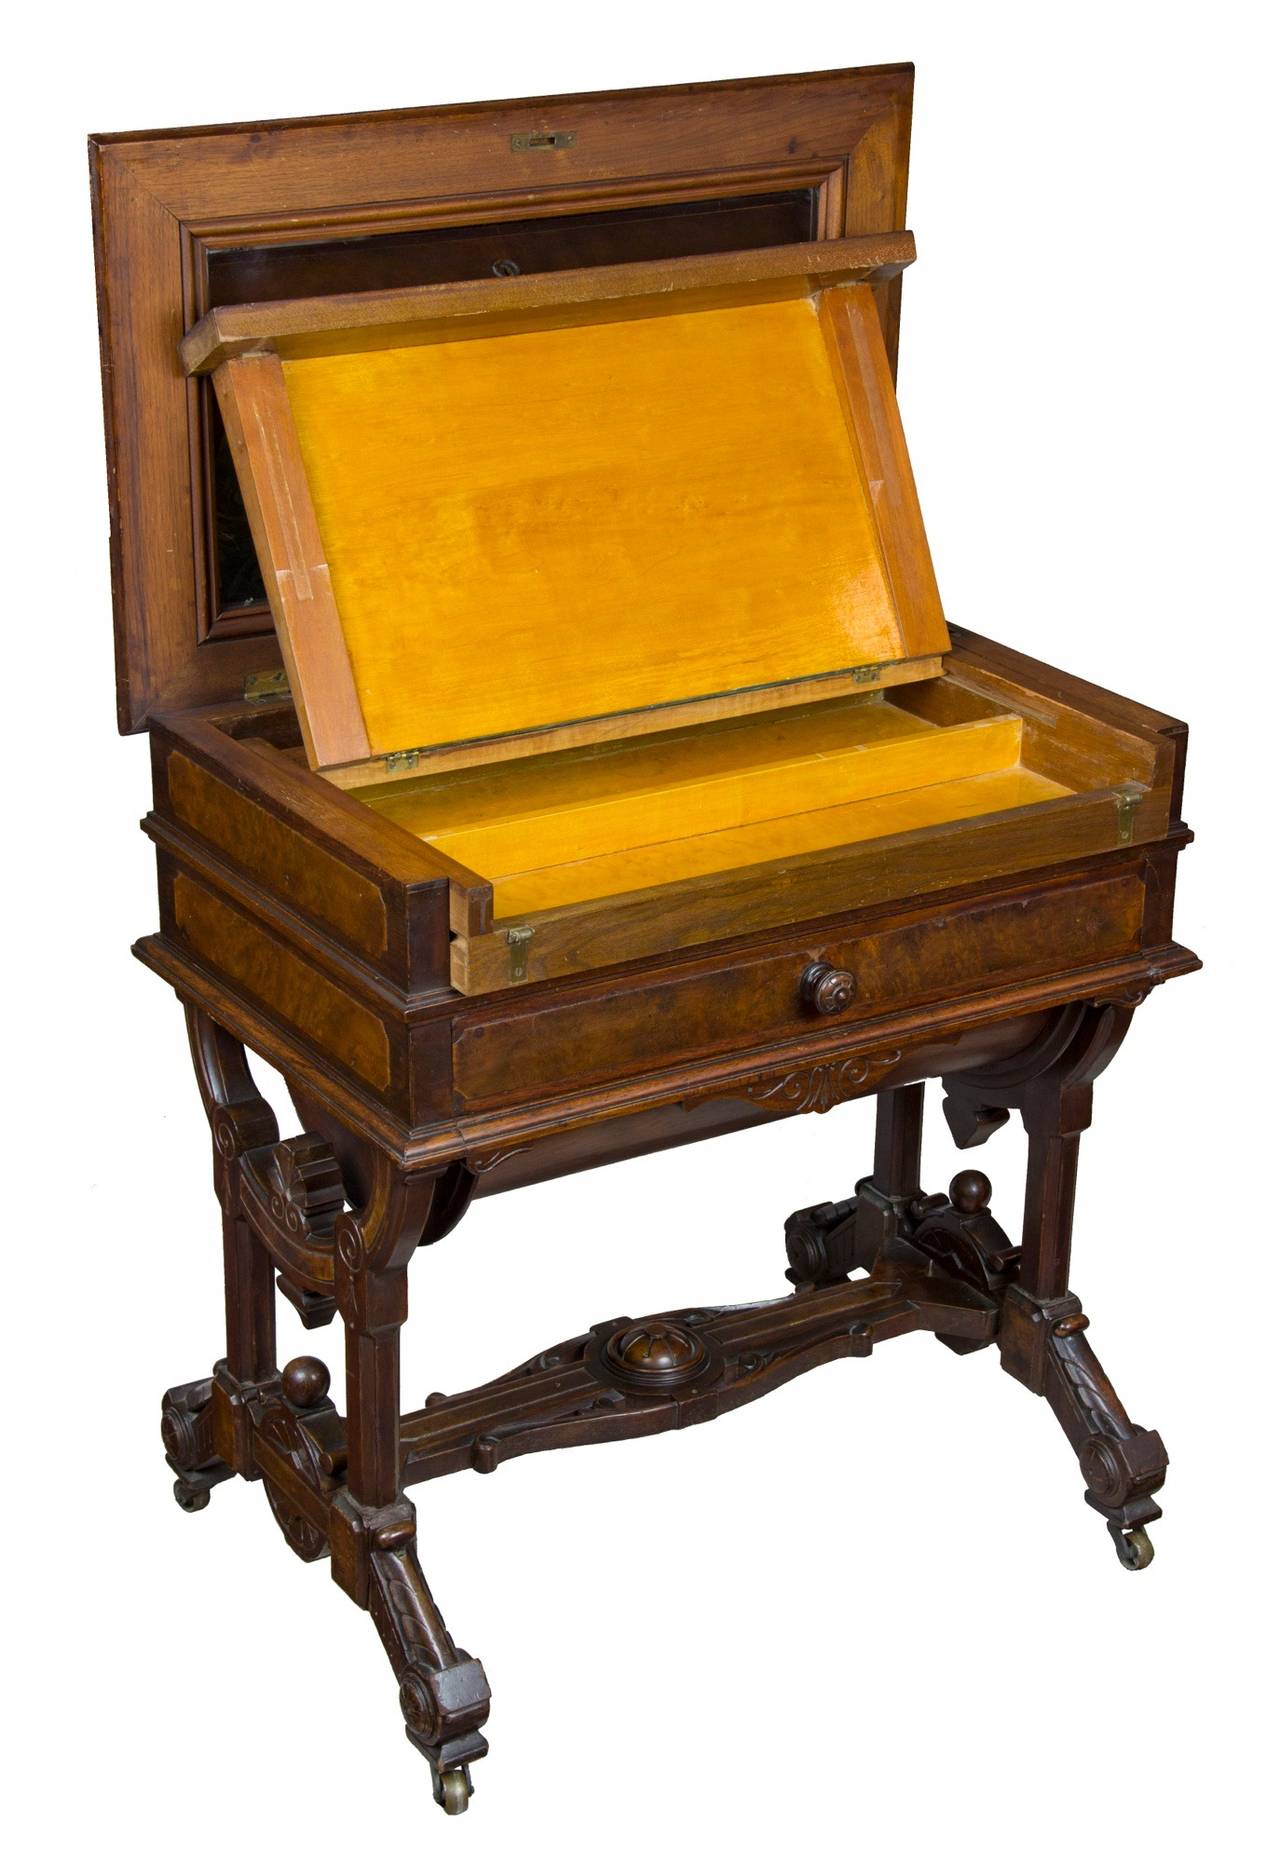 Renaissance Revival Renaissance Walnut Dressing Table Labeled George Hess, Patented, 1876, New York For Sale